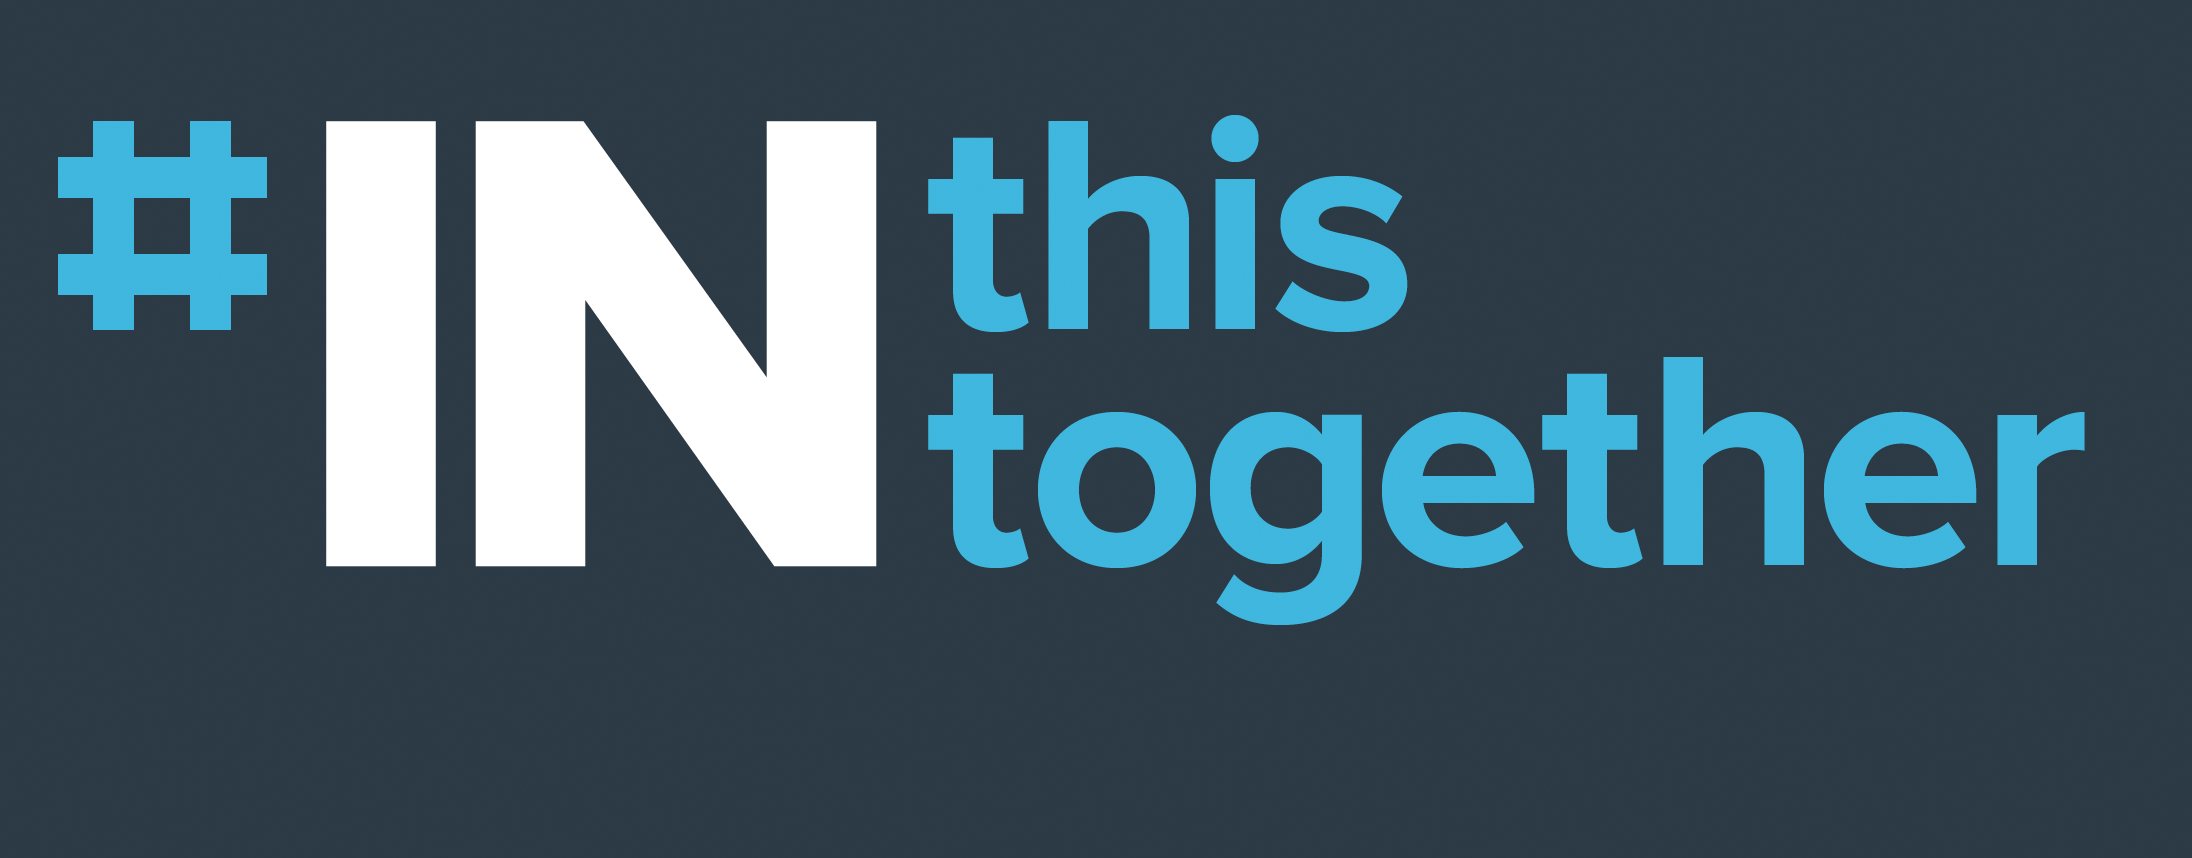 We are #INthistogether